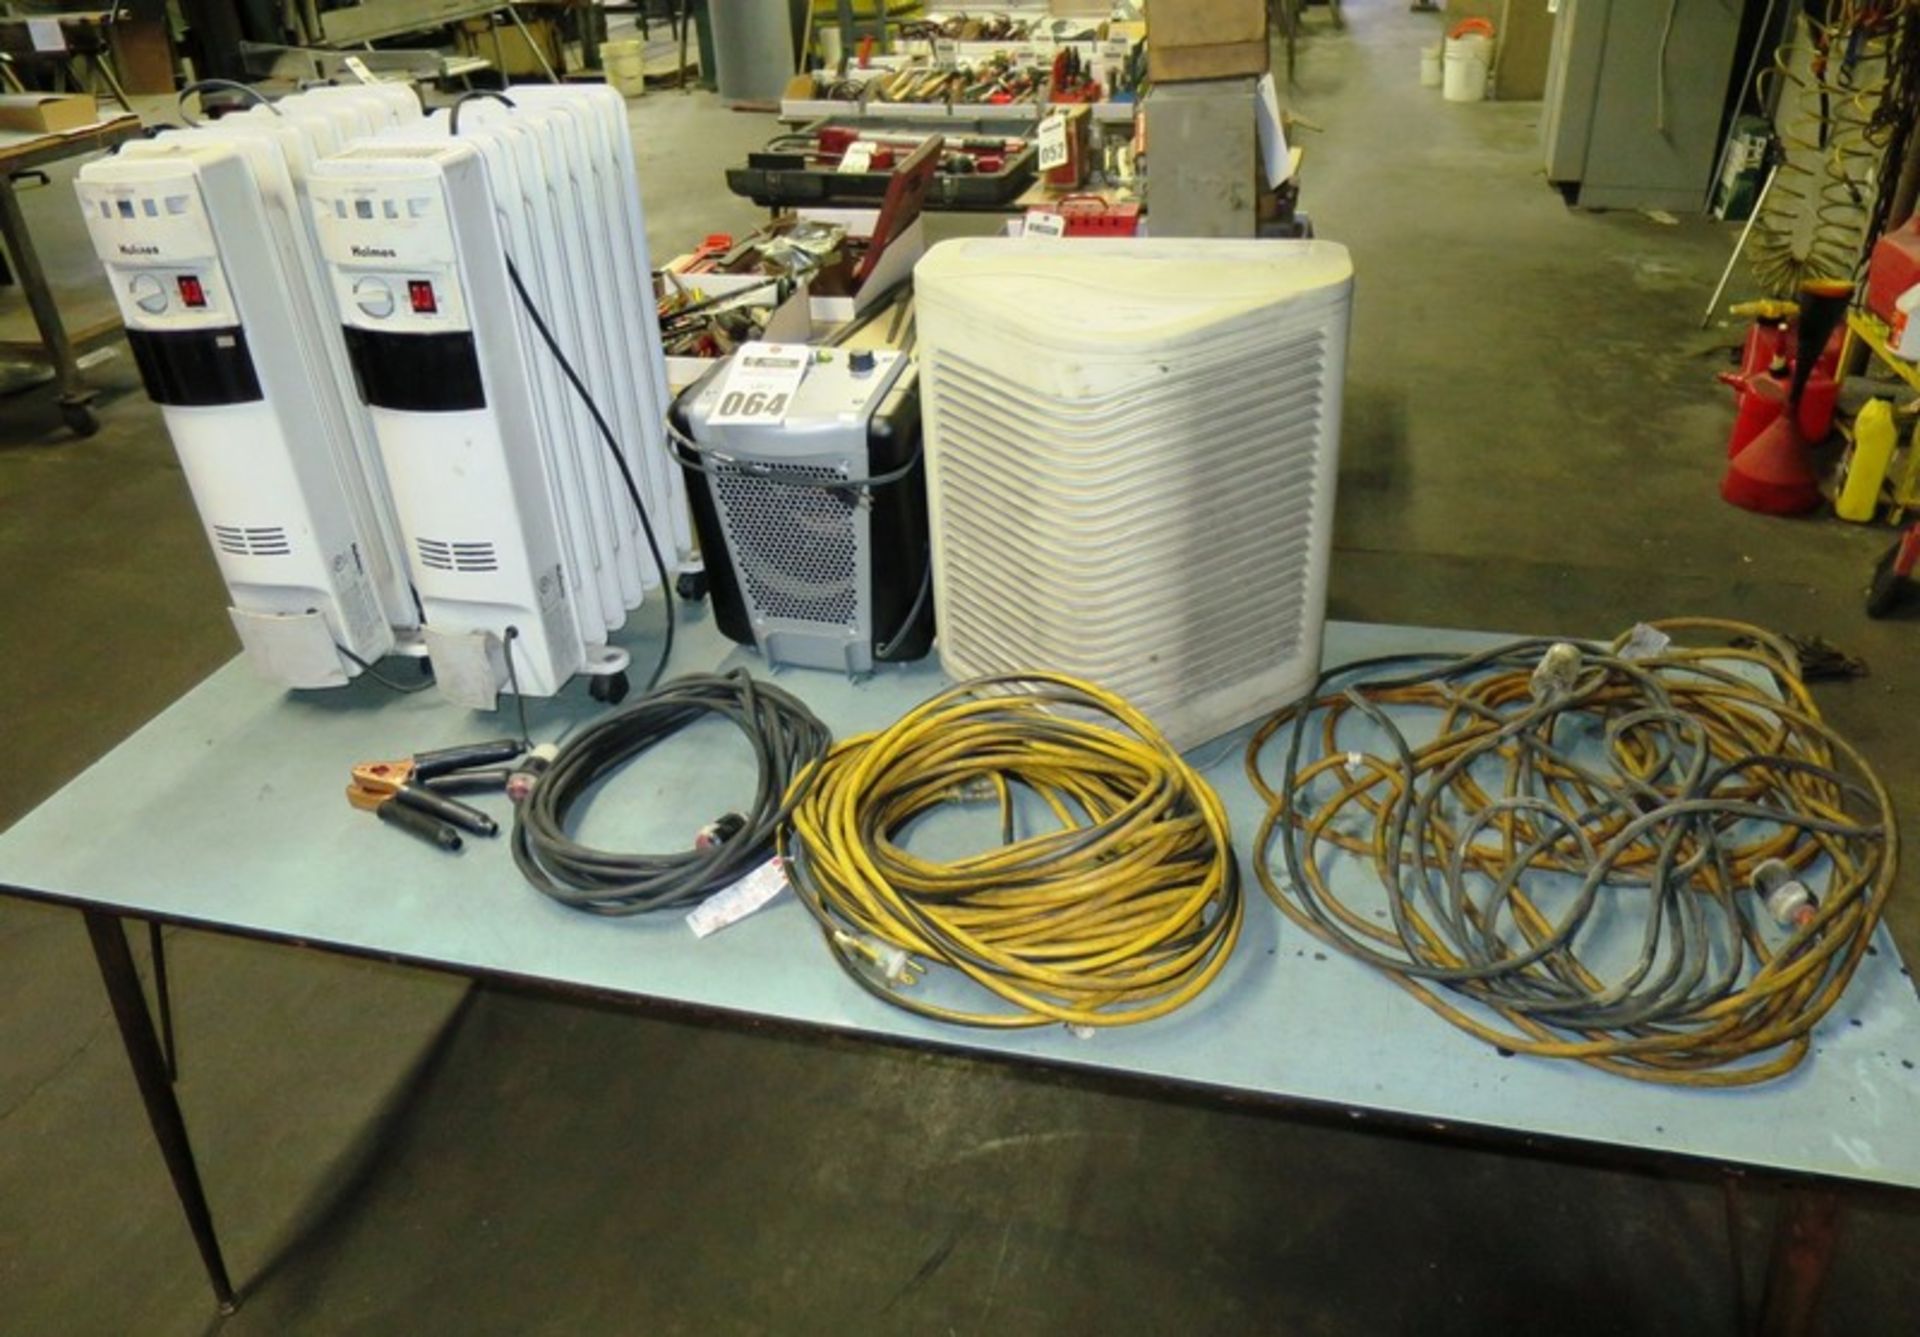 Misc Space Heaters, De-Humidifier, and Extension Cords